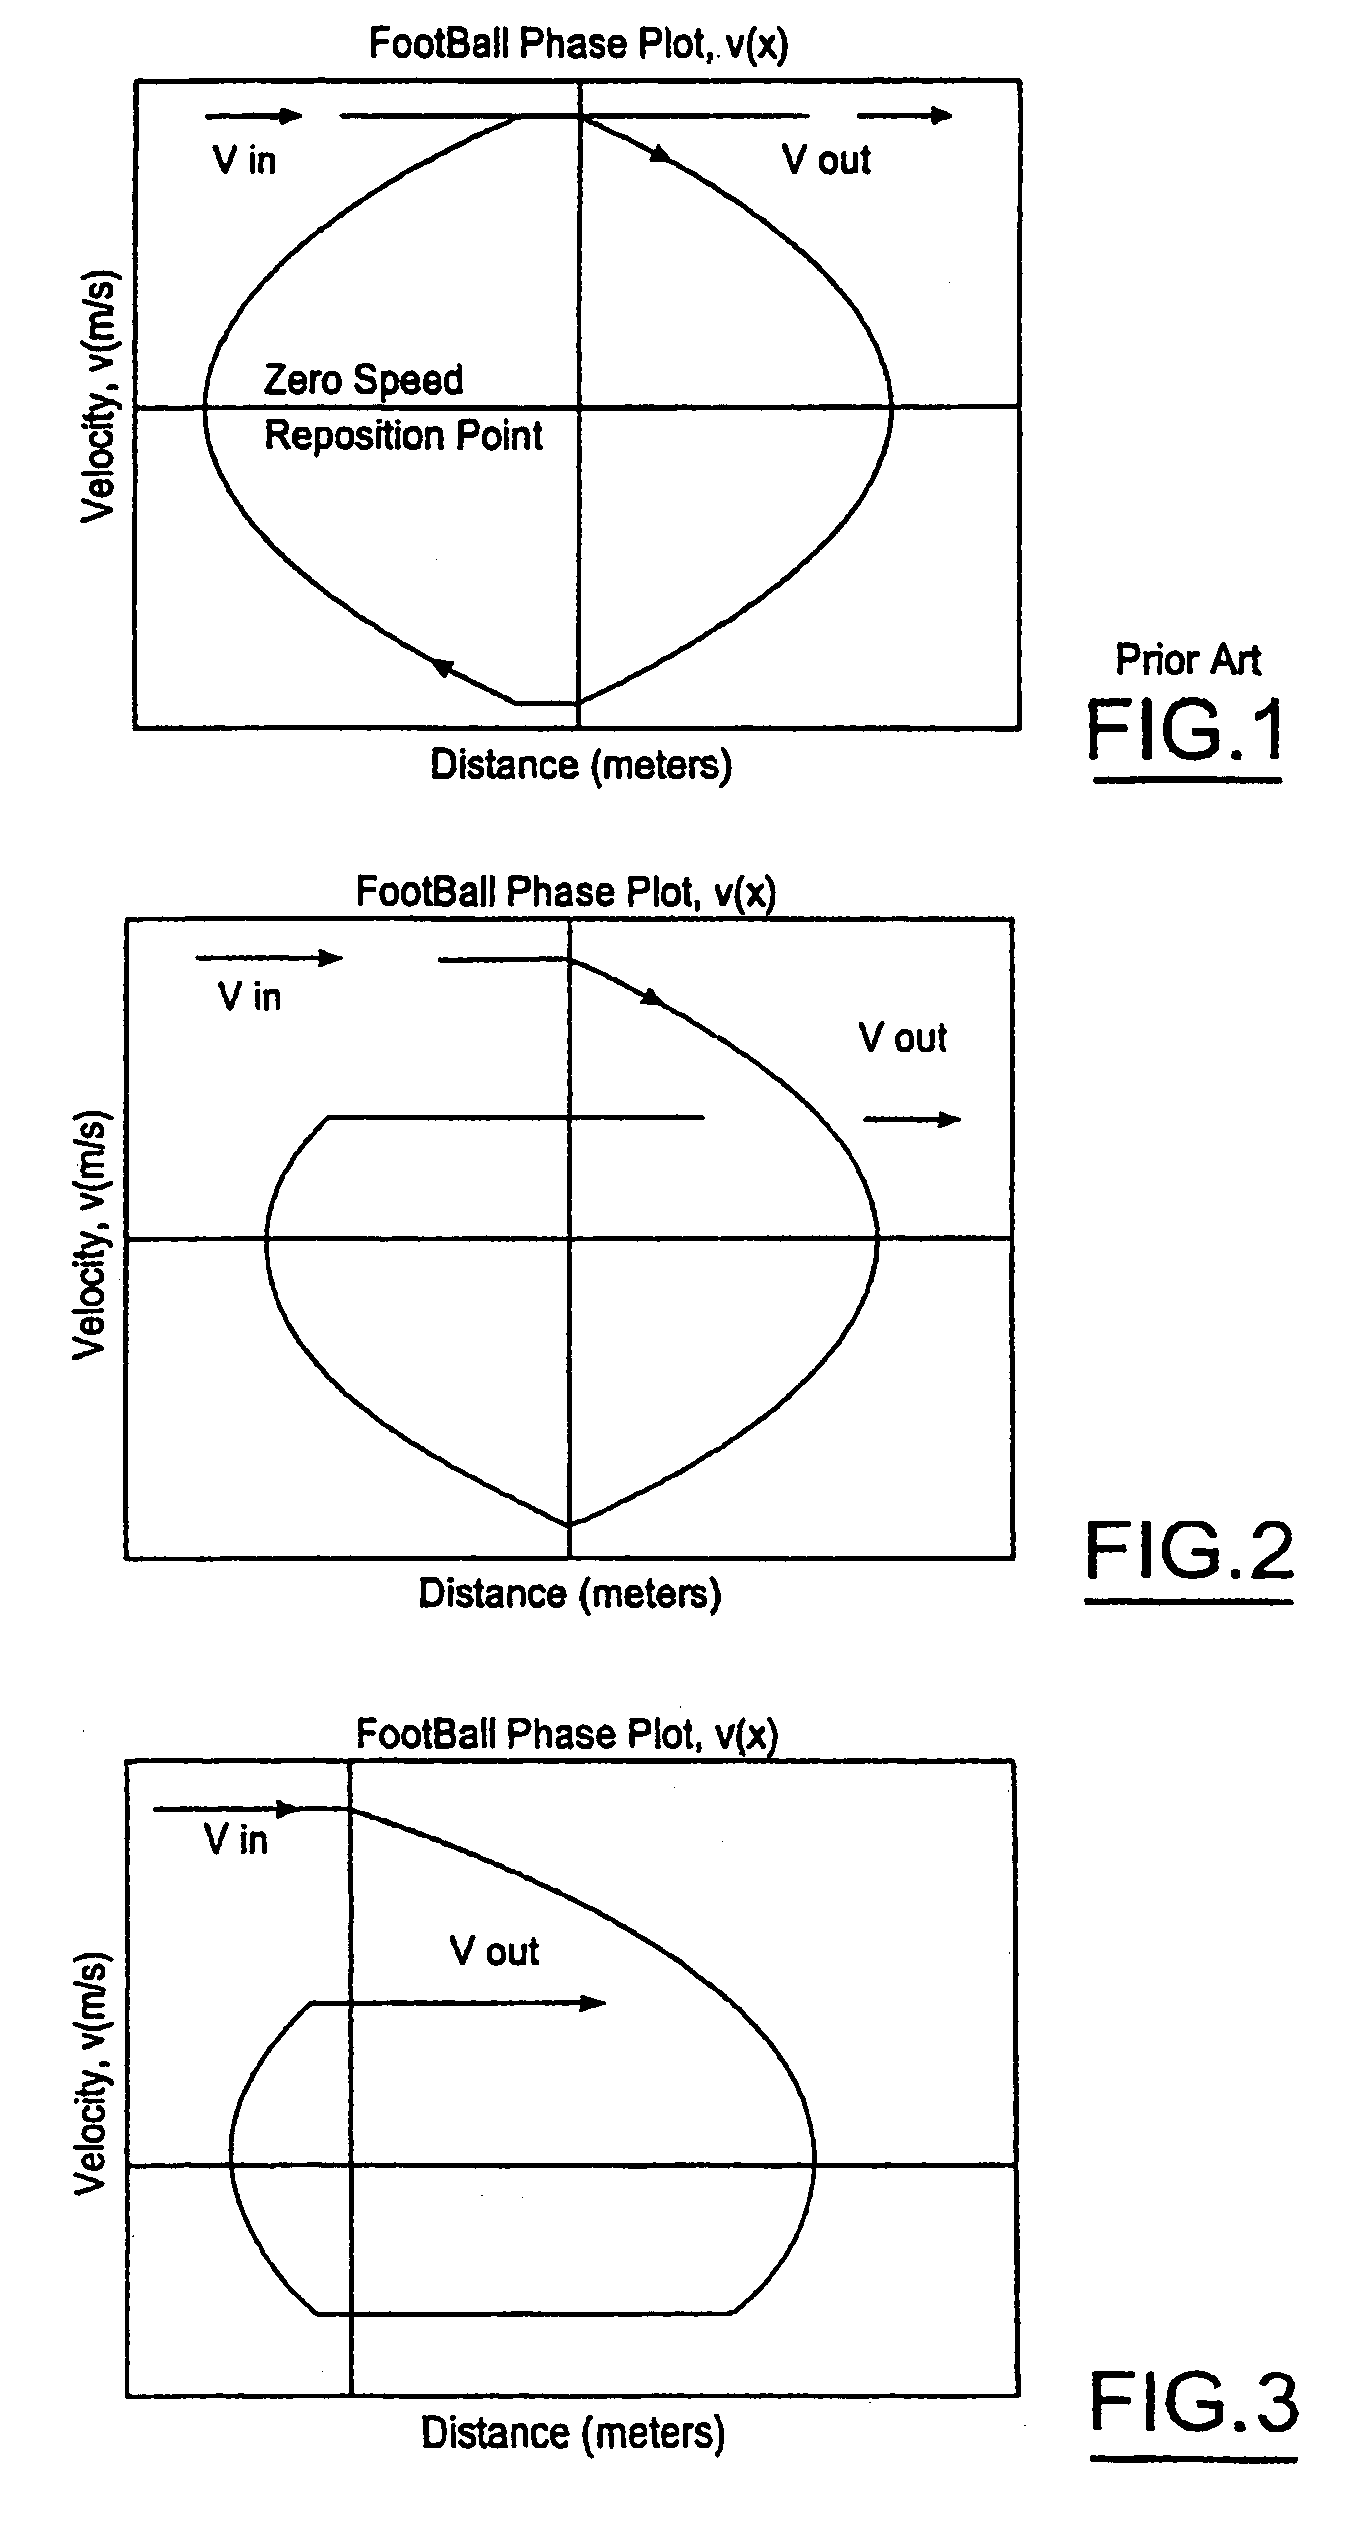 Reduction of tape velocity change backhitch time through use of an intermediate back velocity